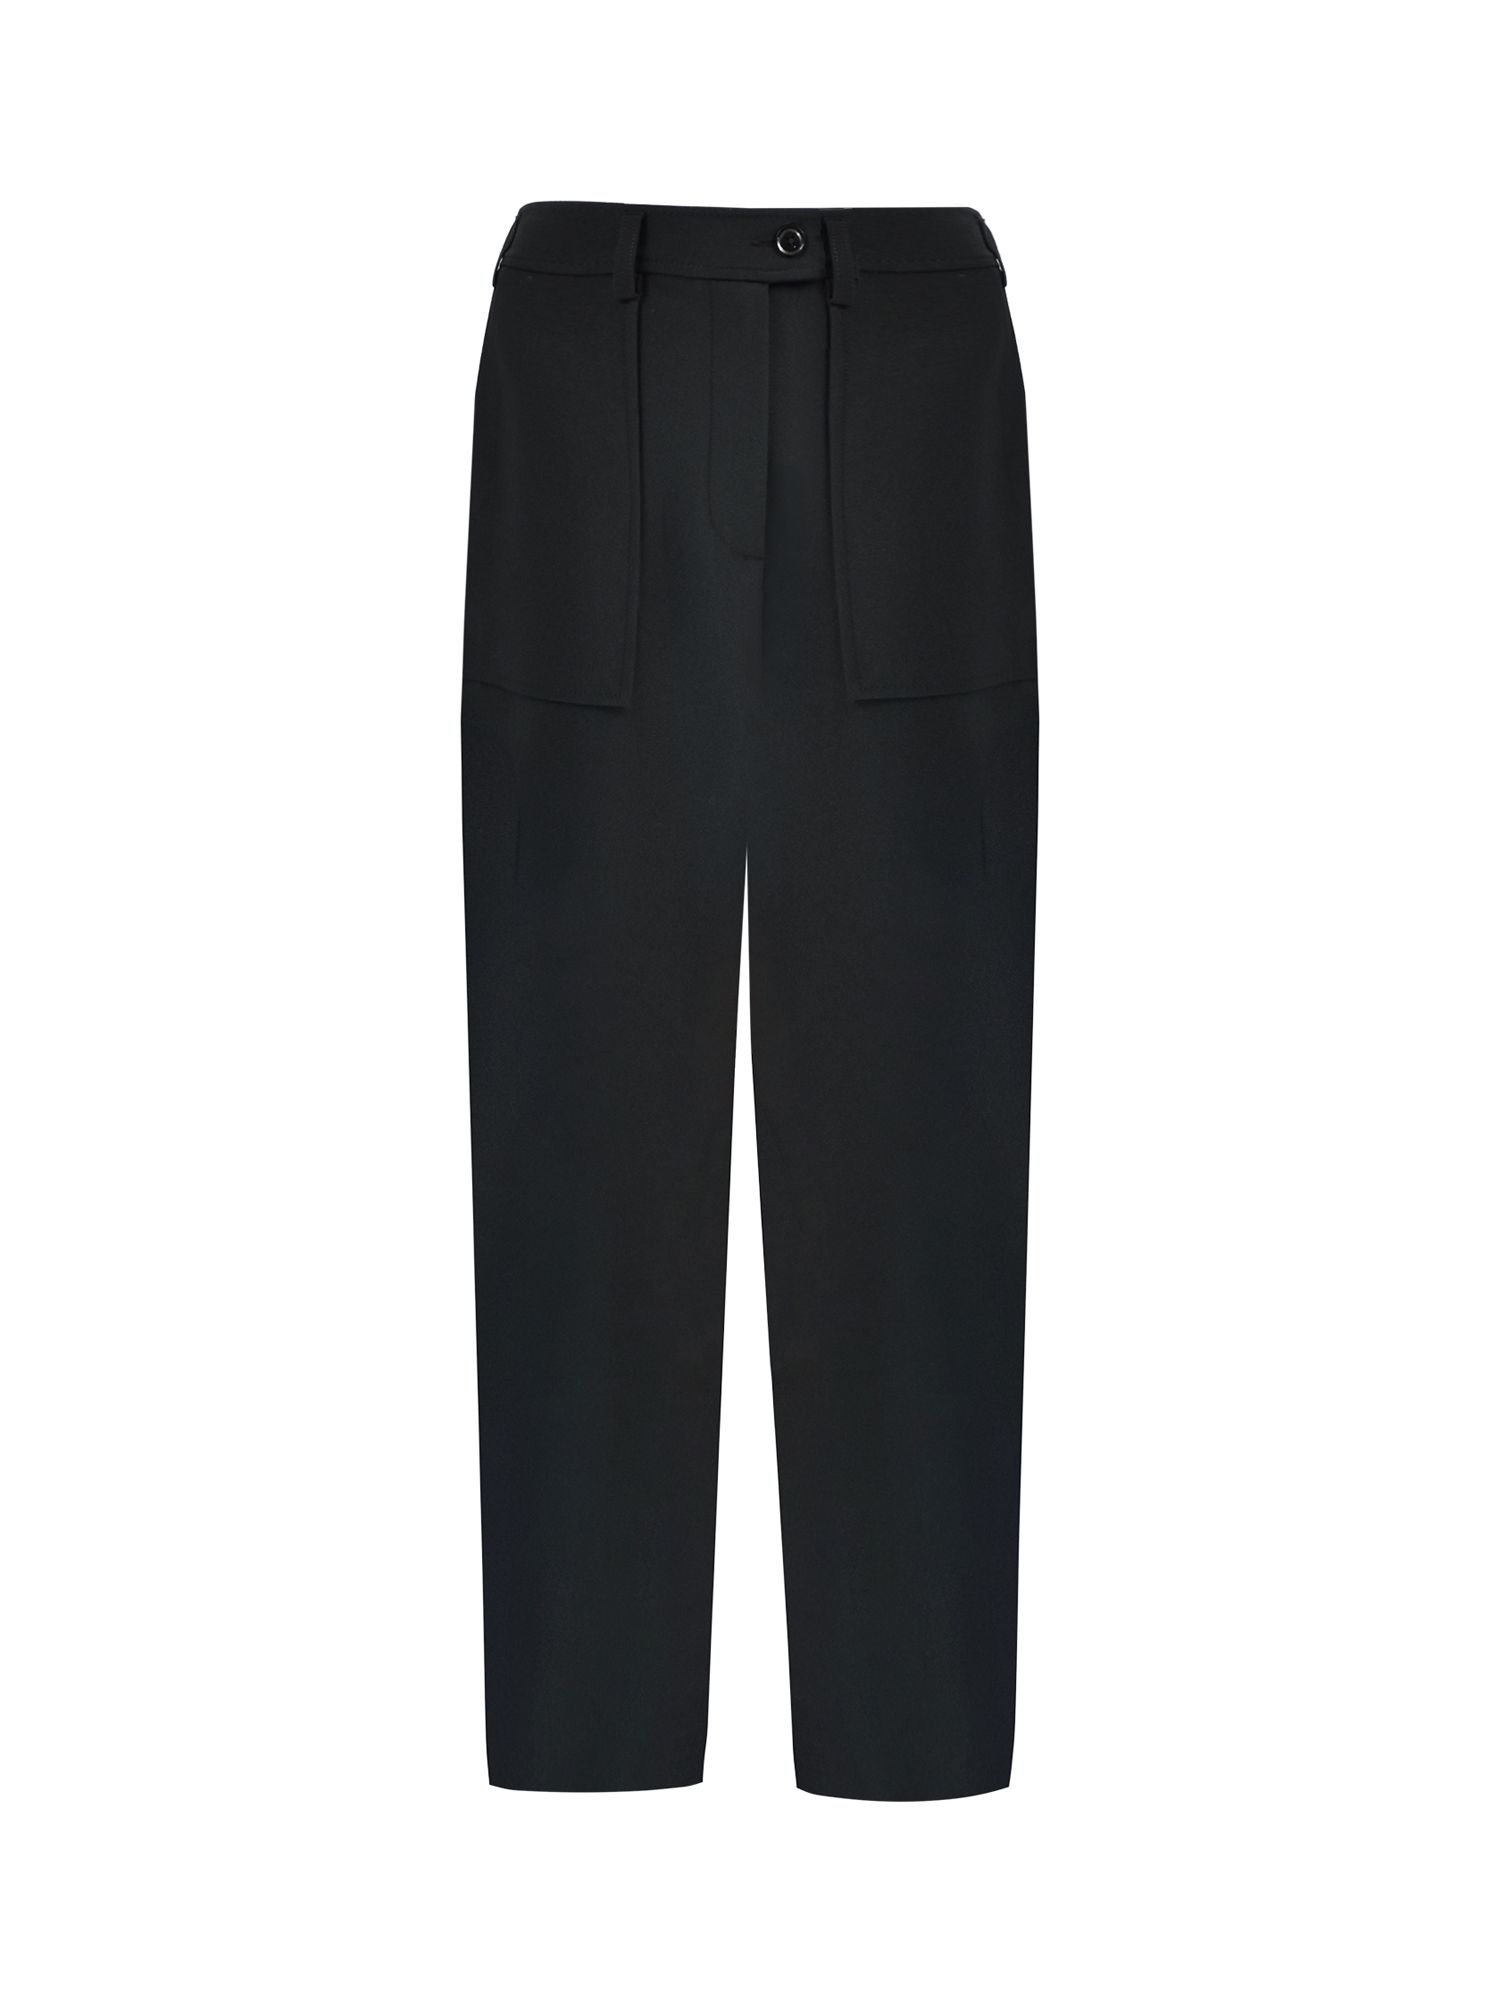 Buy Ro&Zo Petite Patch Pocket Trousers, Black Online at johnlewis.com